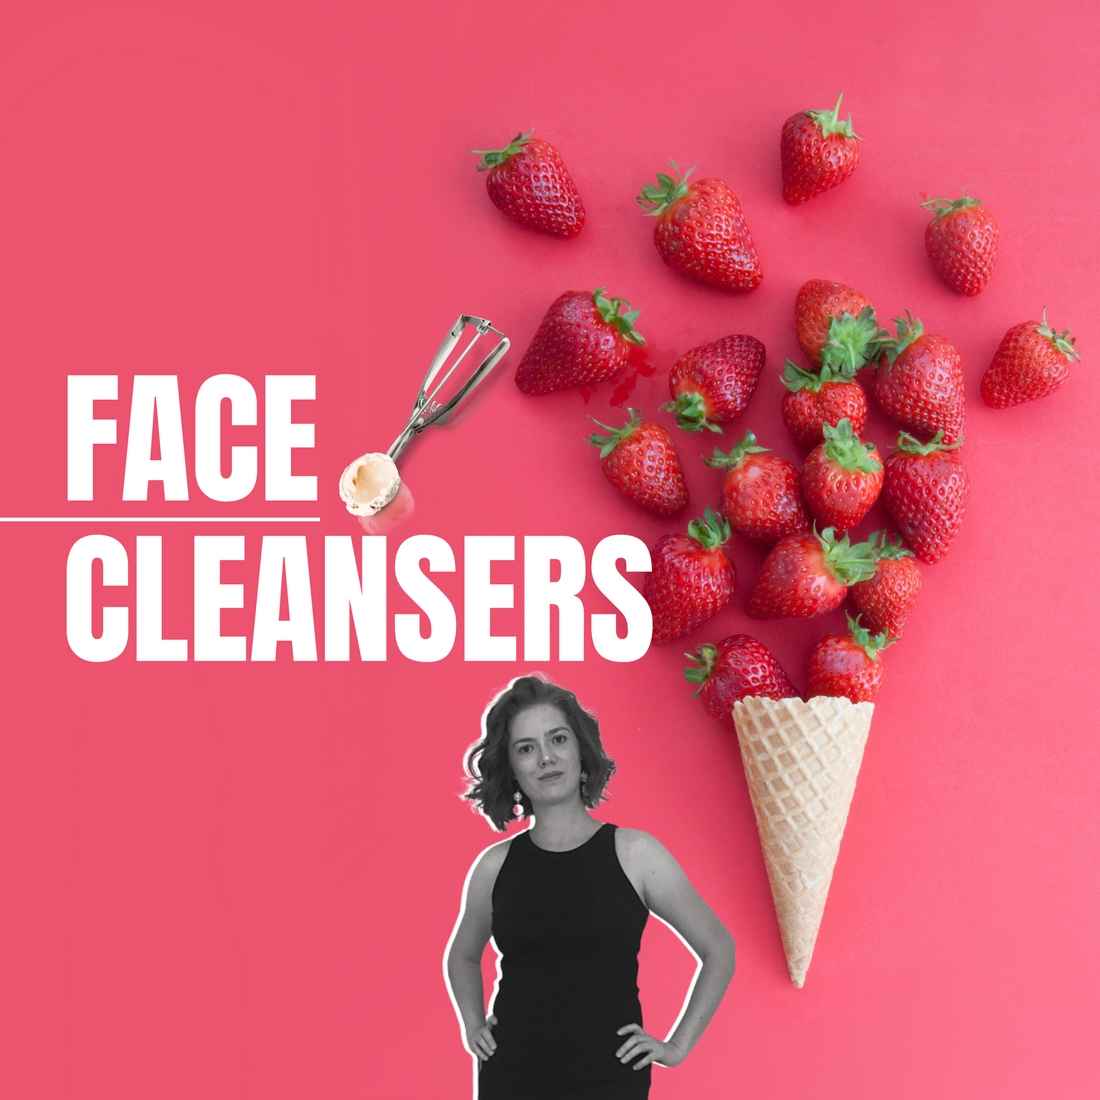 Face cleansers | How to choose the best for your skin type